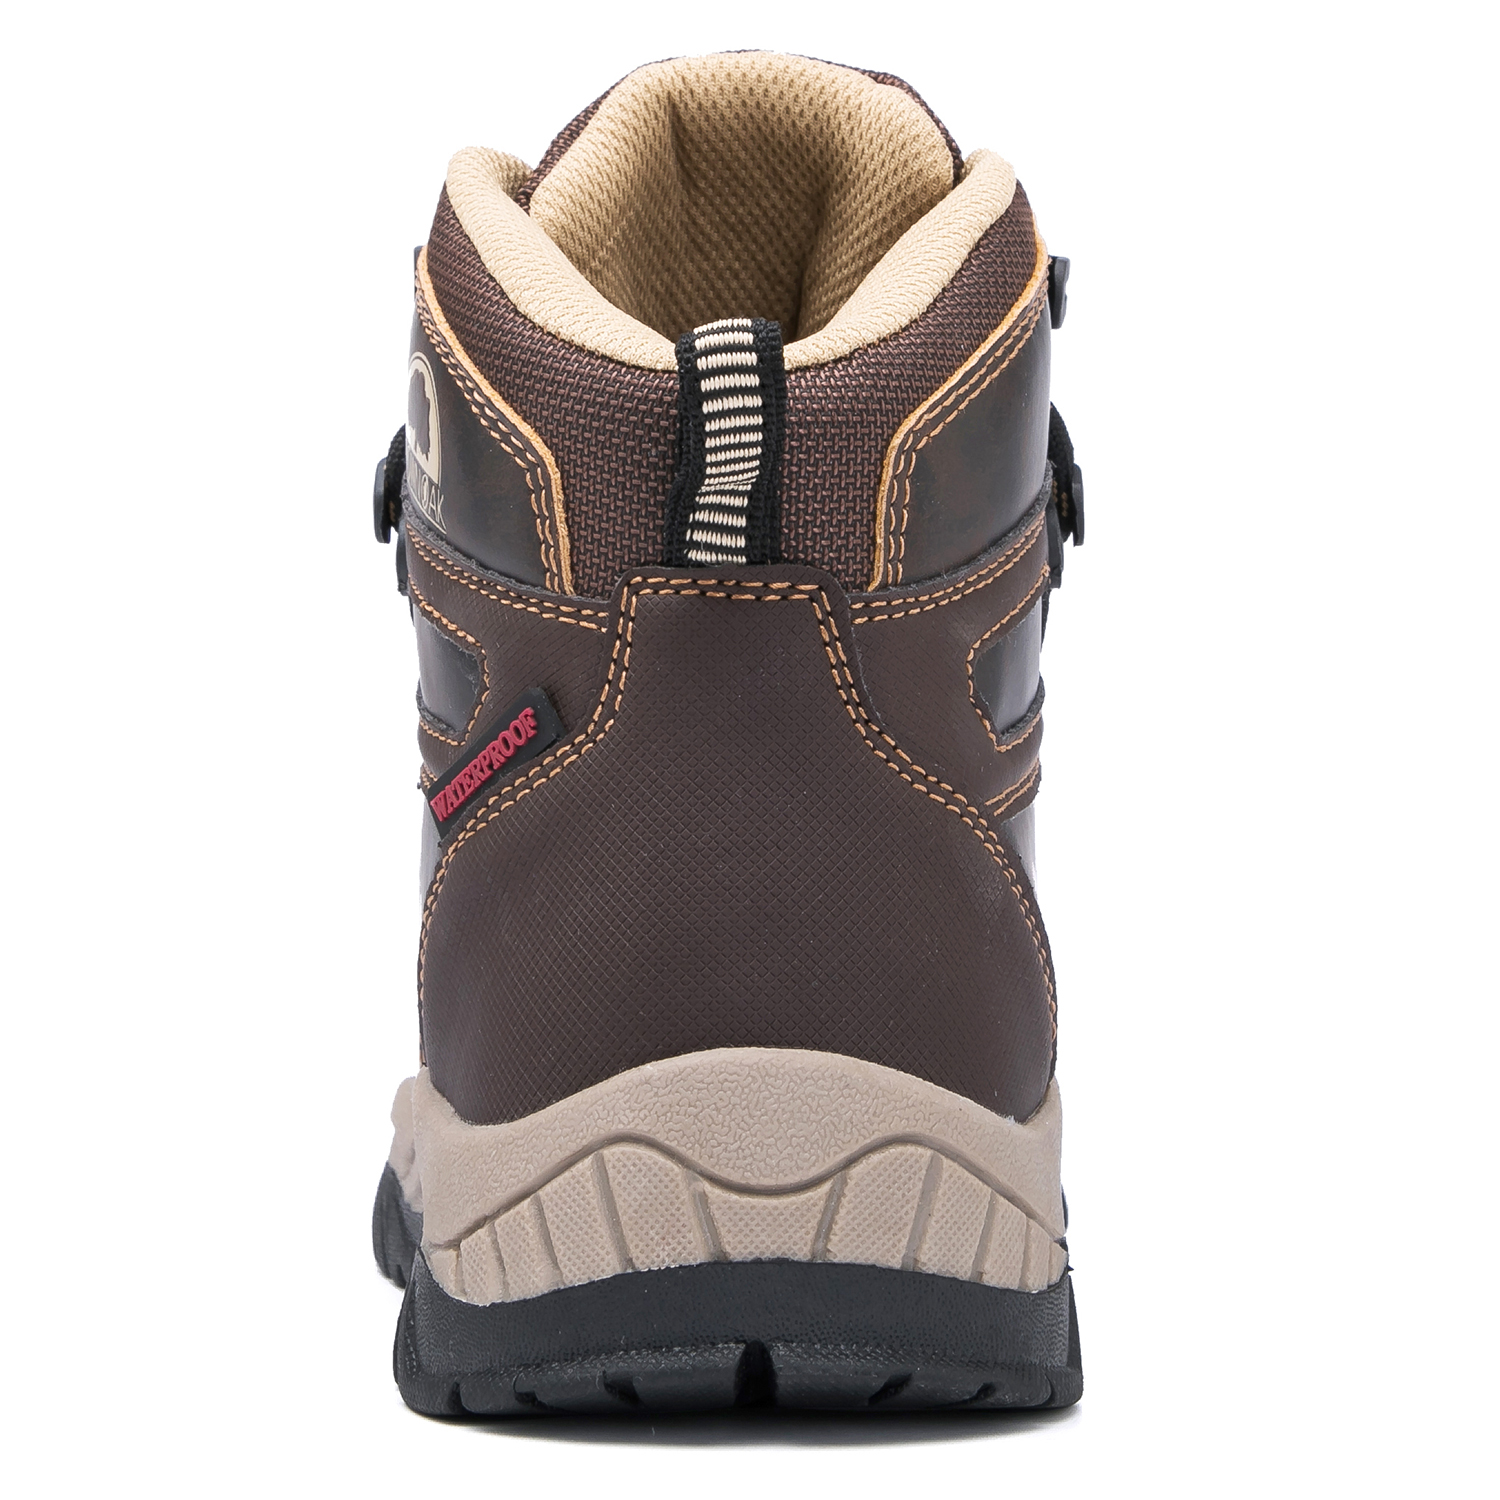 Brown Oak Womens Waterproof Trekking Camping Backpacking Outdoor Shoes Hiking Boots - image 5 of 7